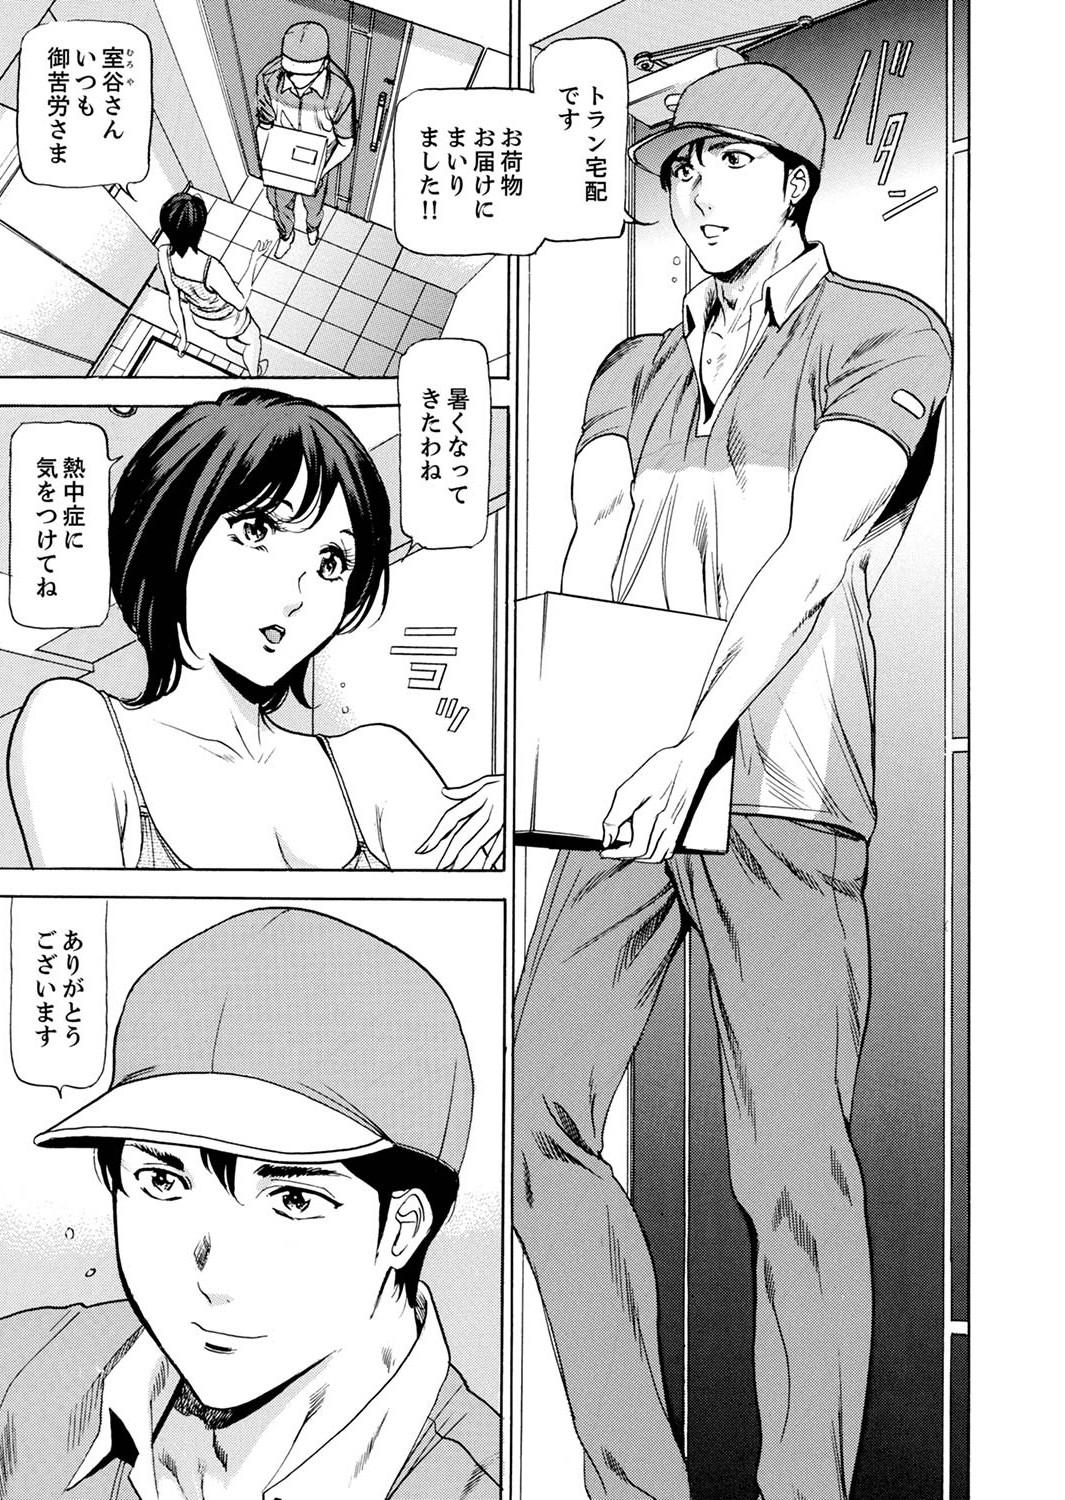 Humiliation 玄関先からはじまる不倫～配達員のセックスは手加減なし！【合本版】 1 Selfie - Page 7